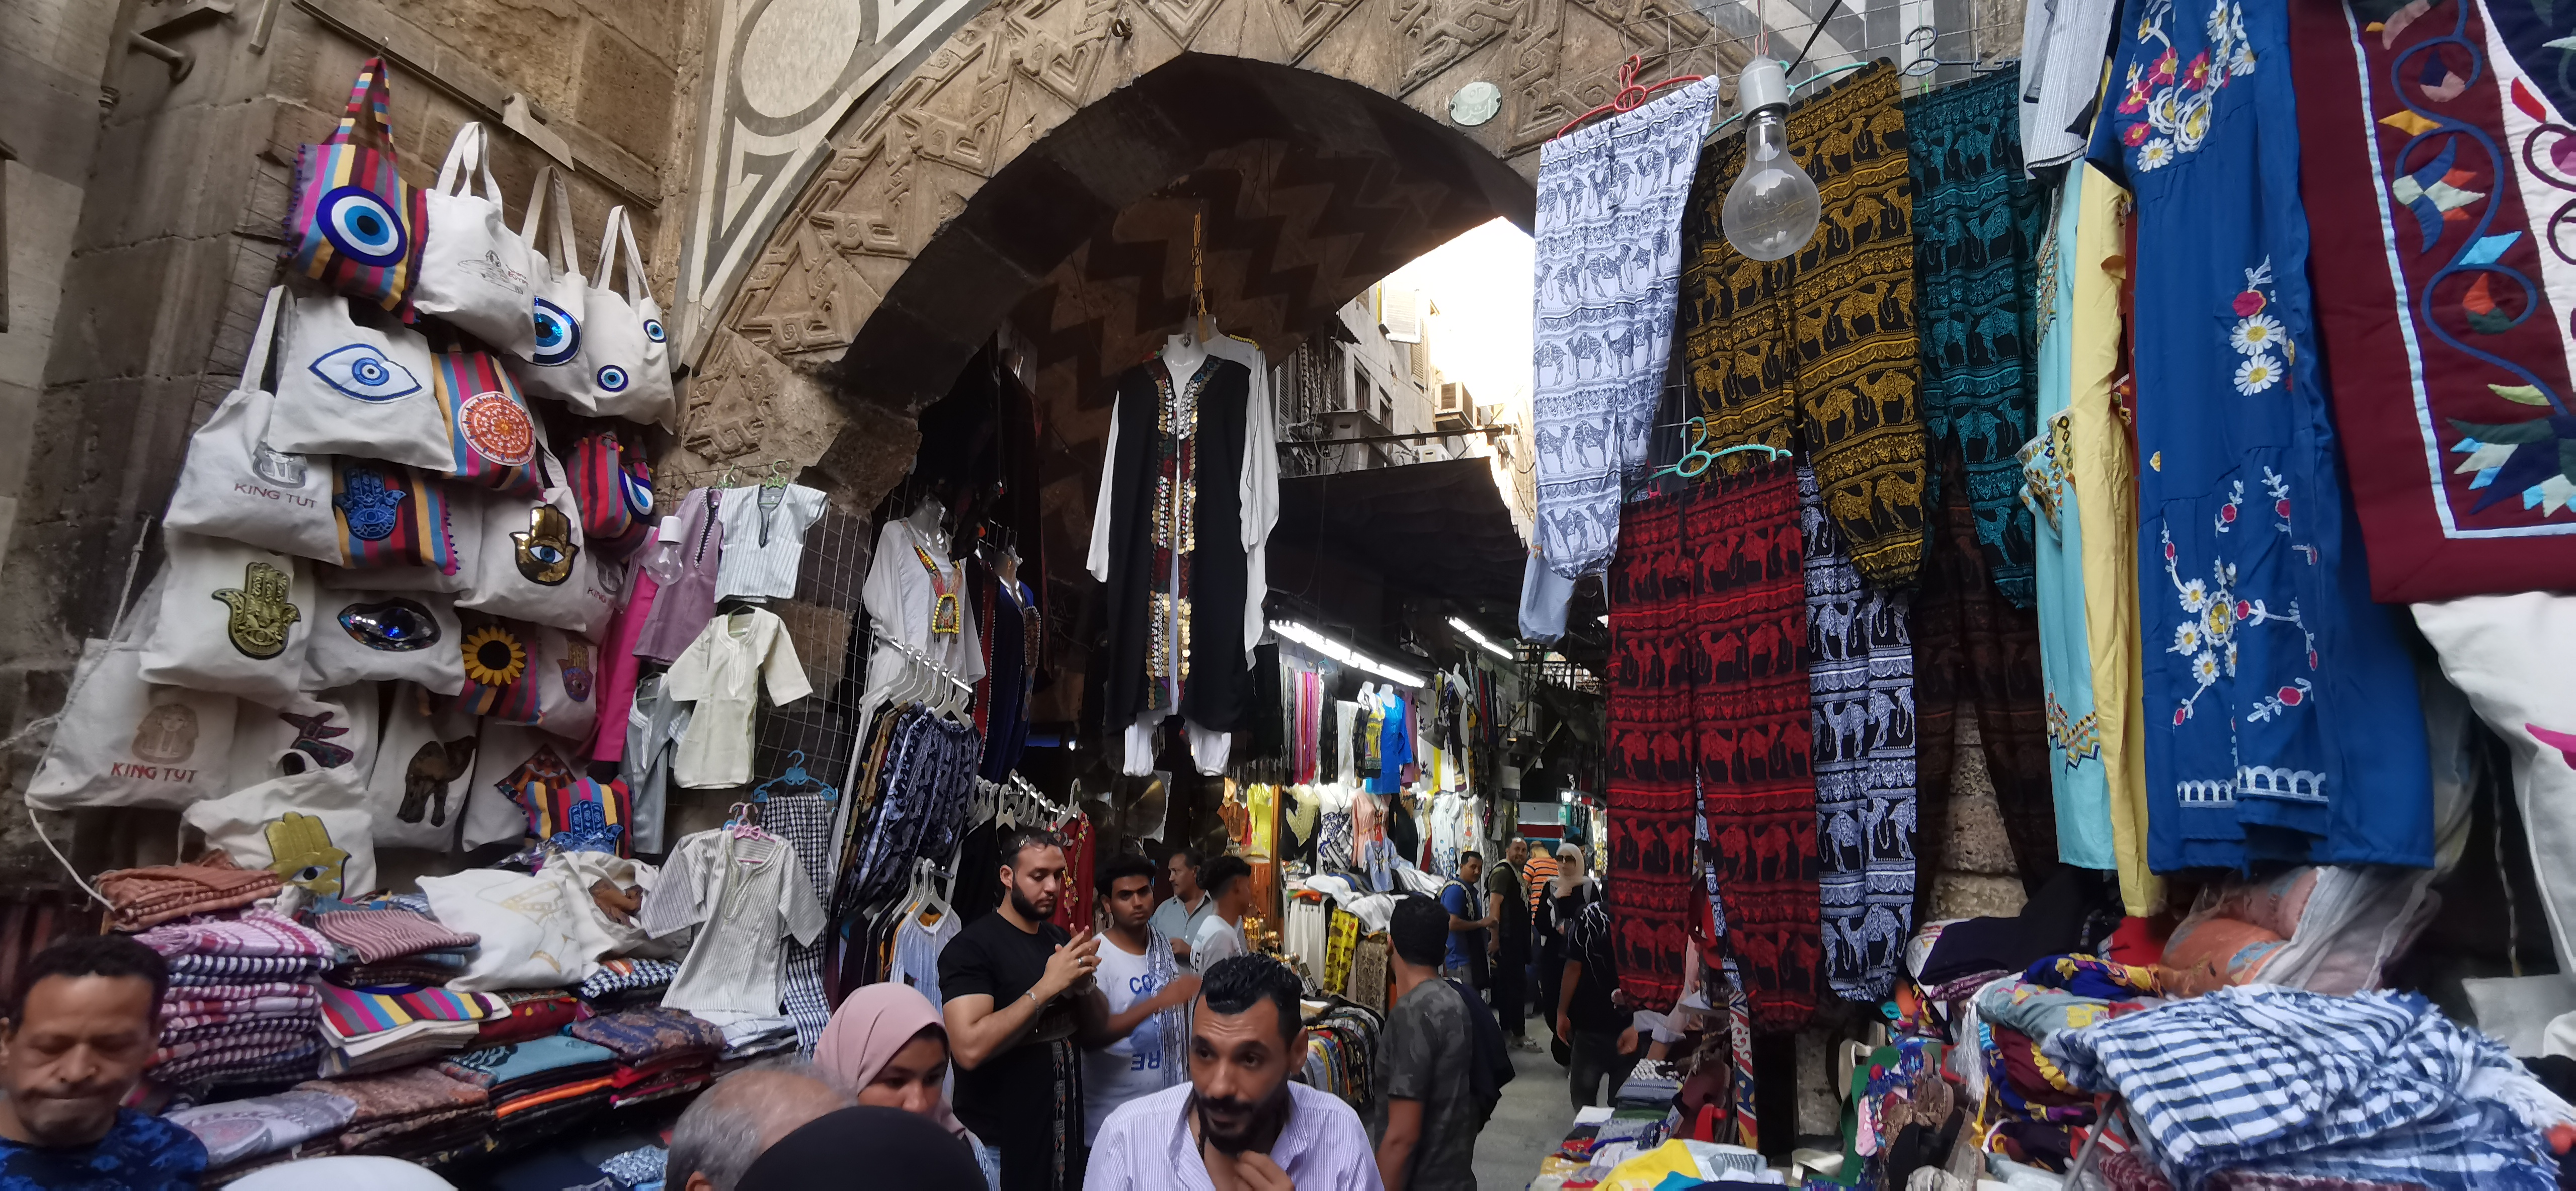 Local goods are on display at the Khan El-Khalili market in Cairo. /CGTN